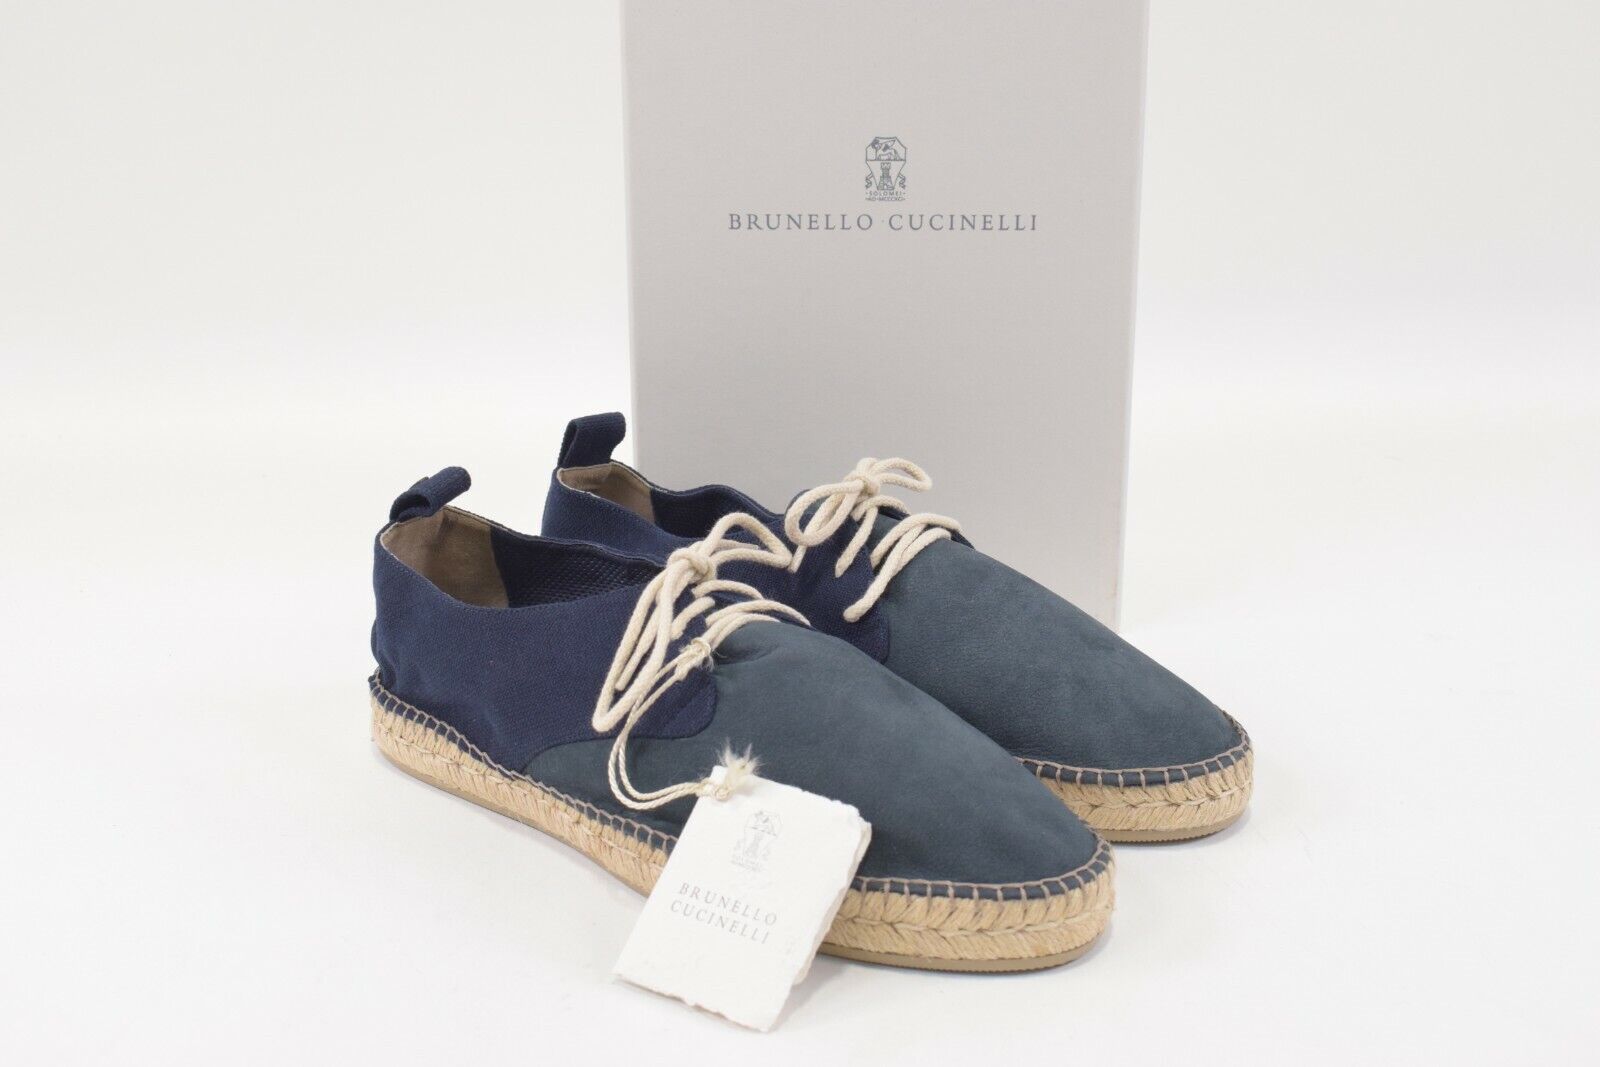 Brunello Cucinelli NWB Espadrilles Casual Wholesale Shoes 9 In Size Max 57% OFF 42 US